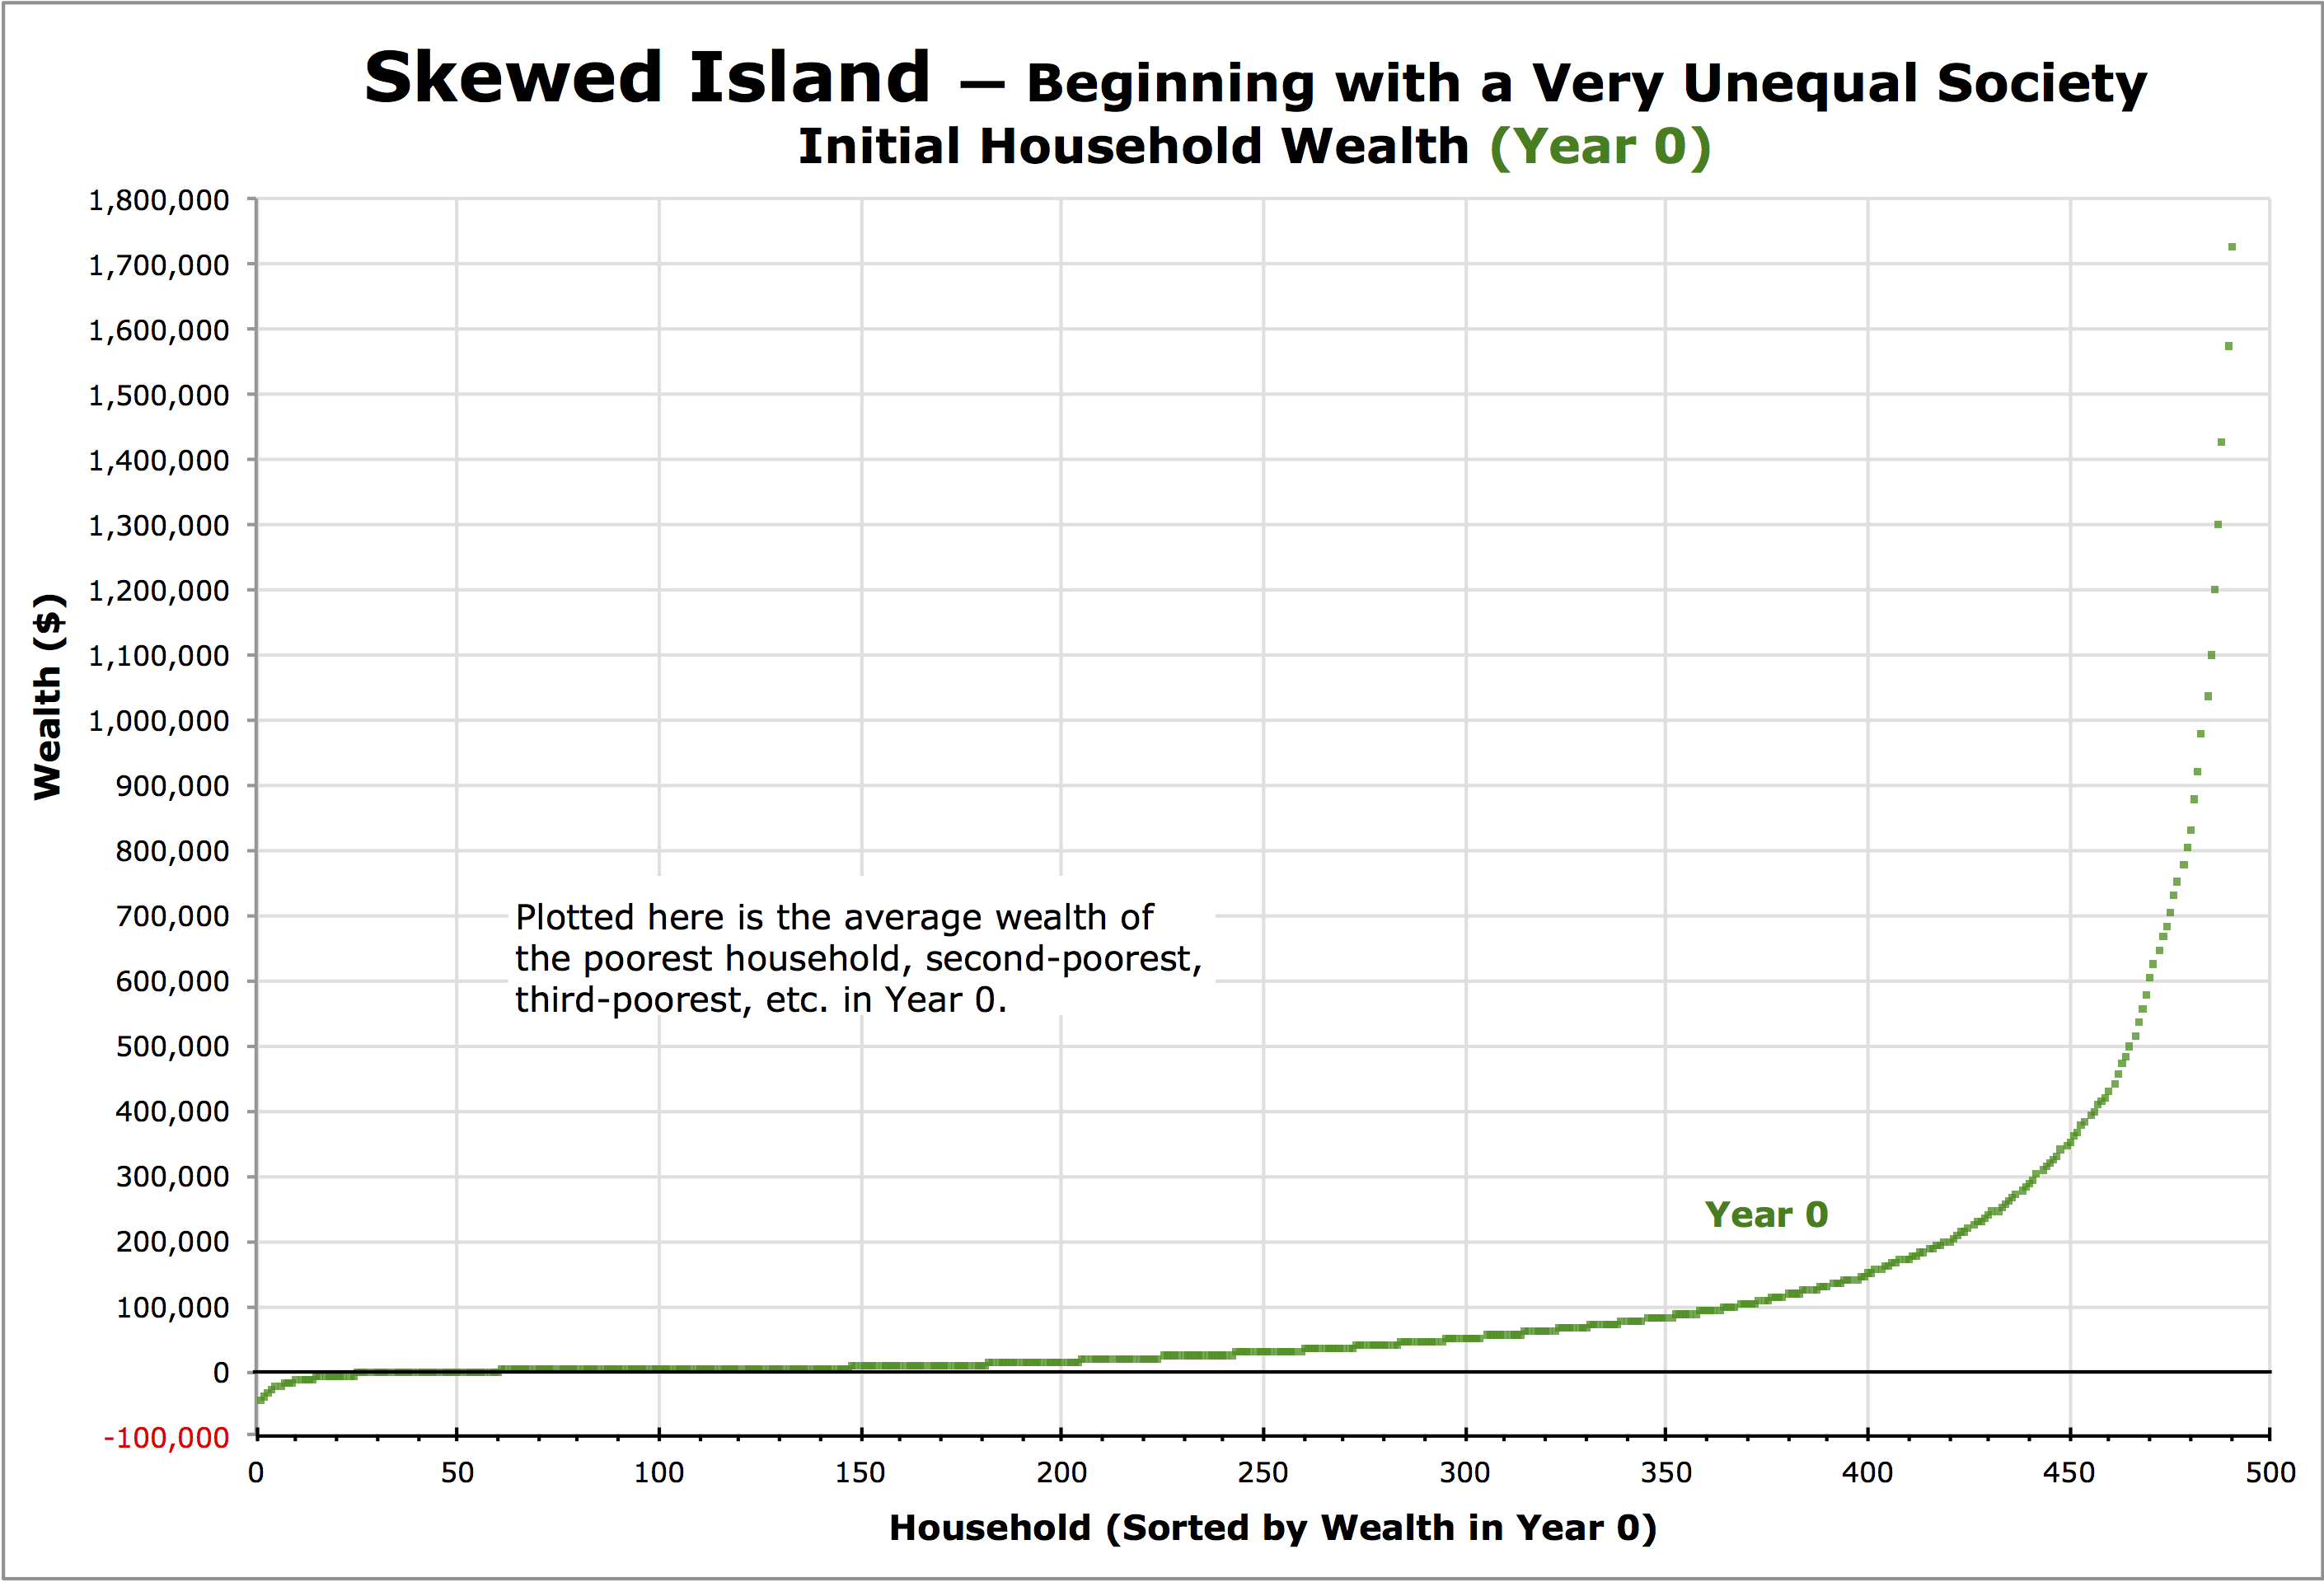 Skewed Island Graph Showing Only the Year 0 Wealth Distribution